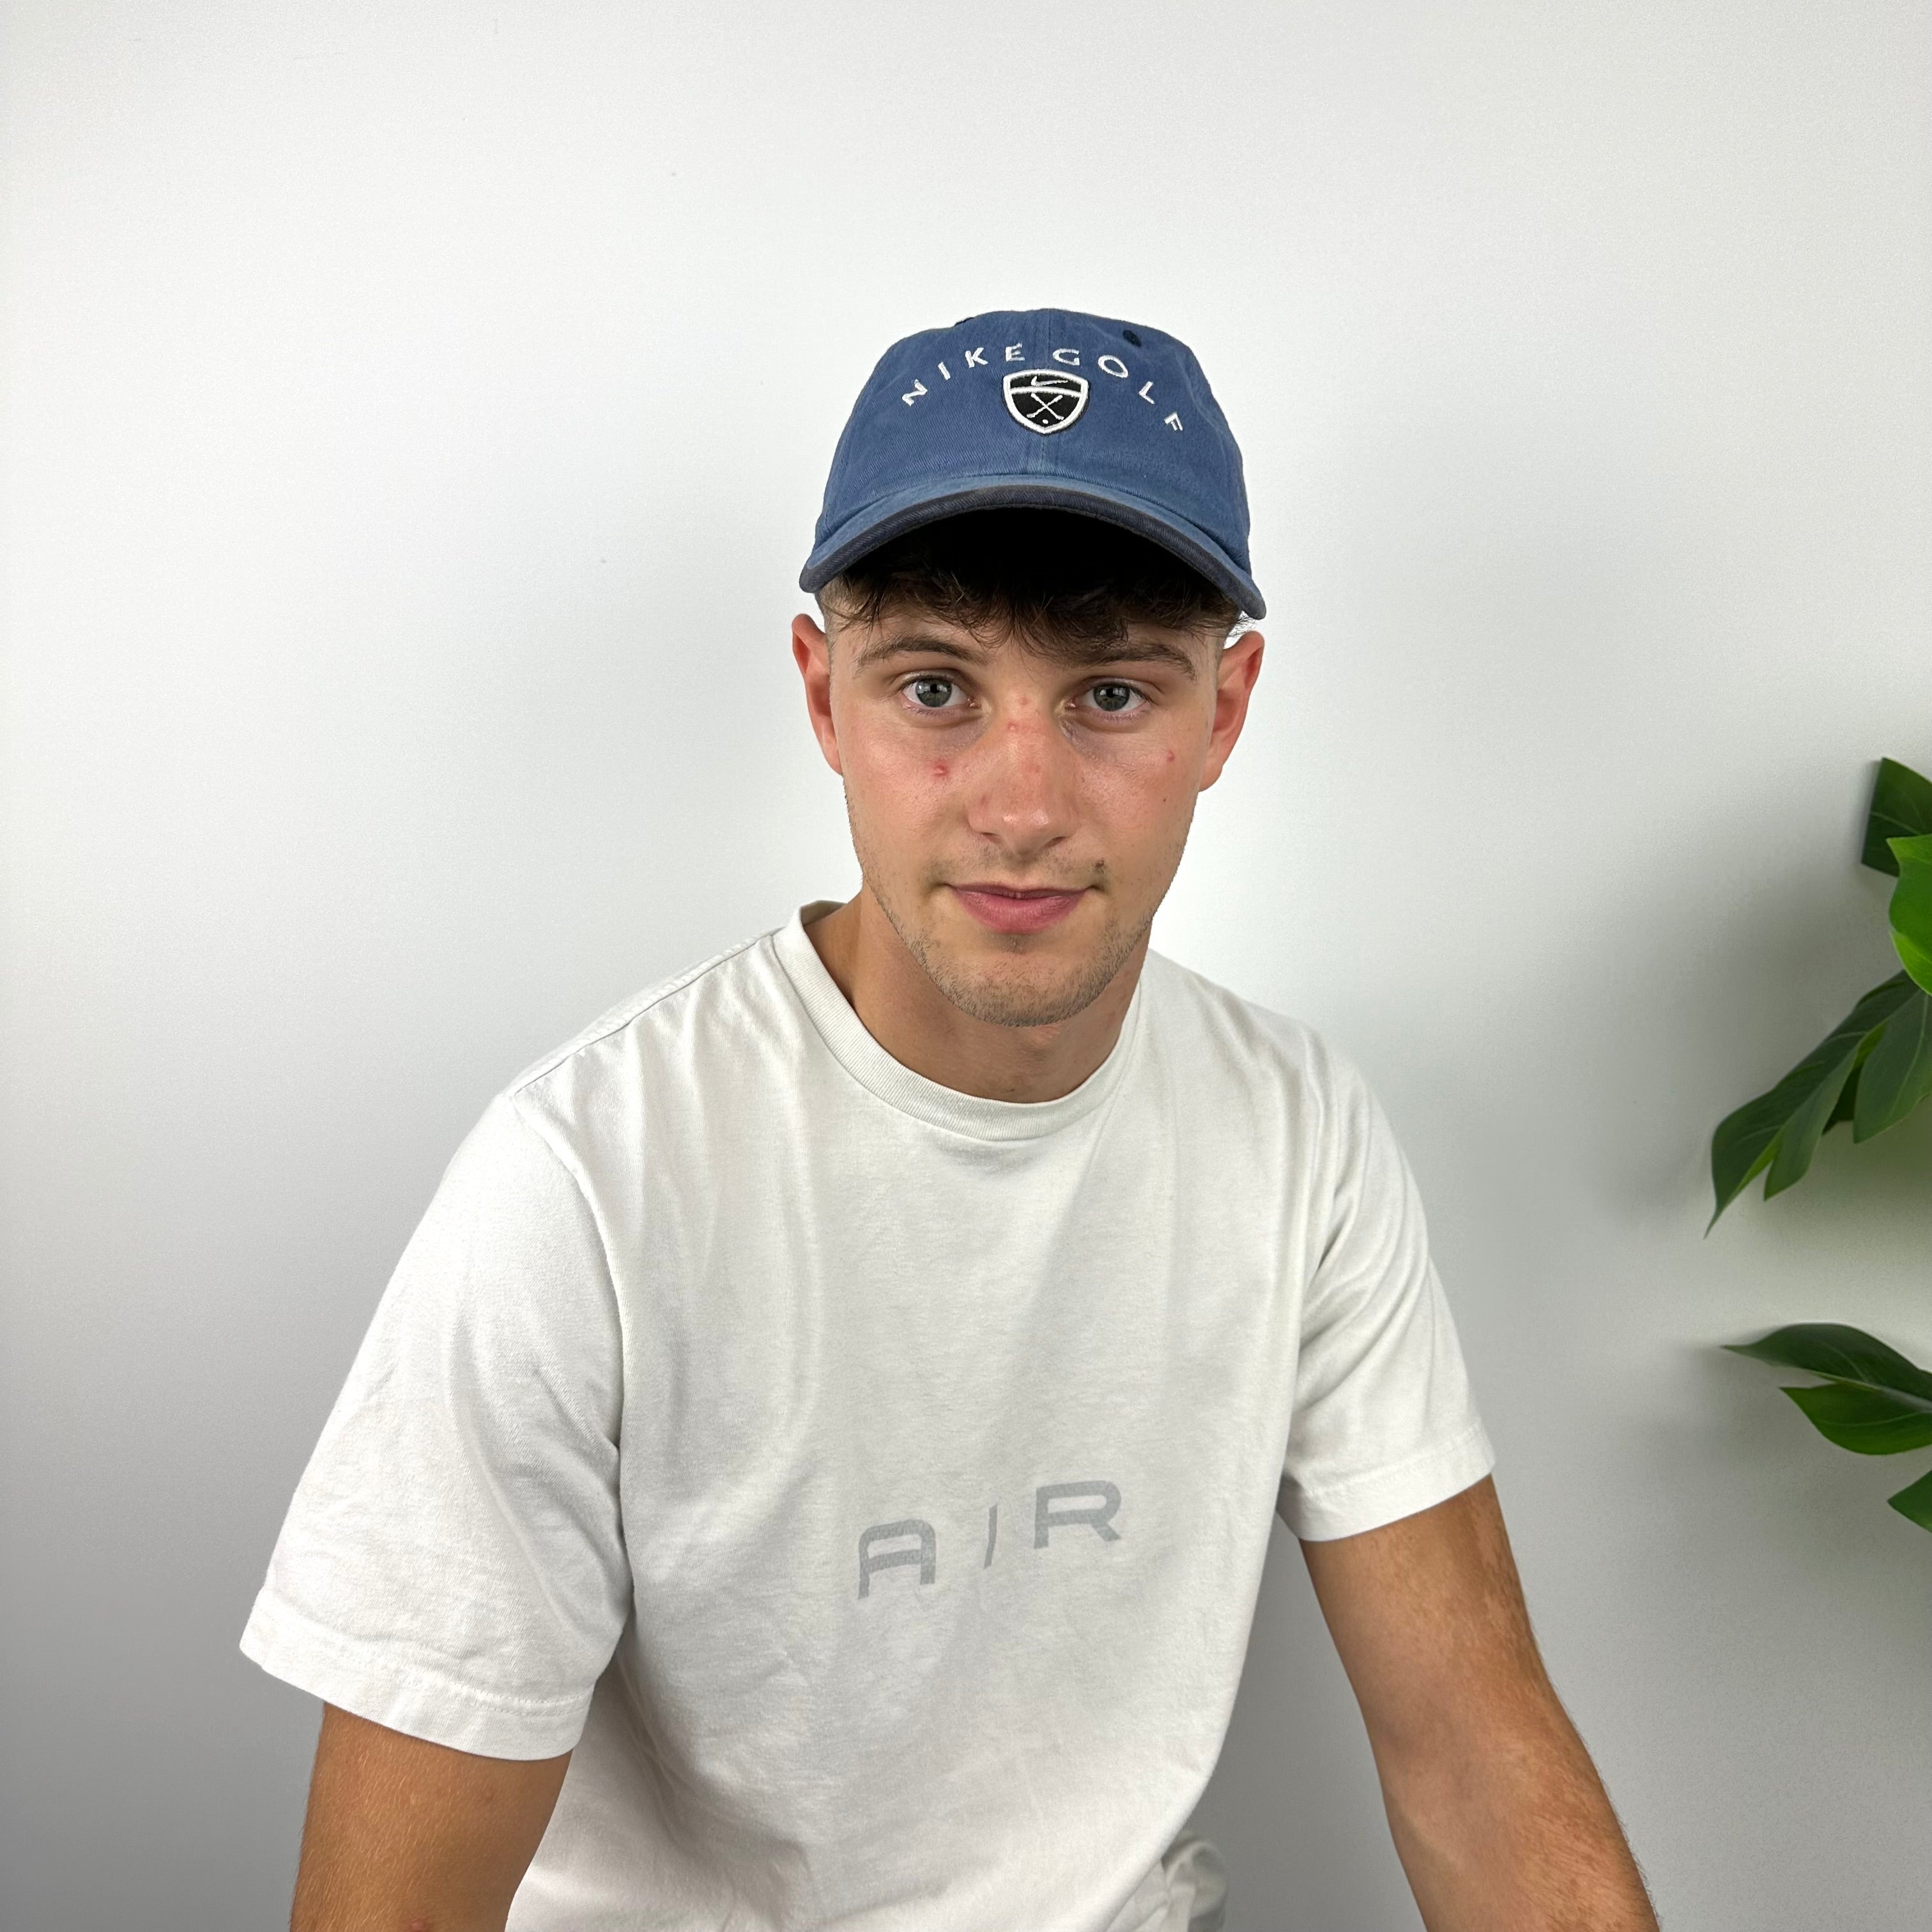 Nike Golf Blue Embroidered Spell Out Cap